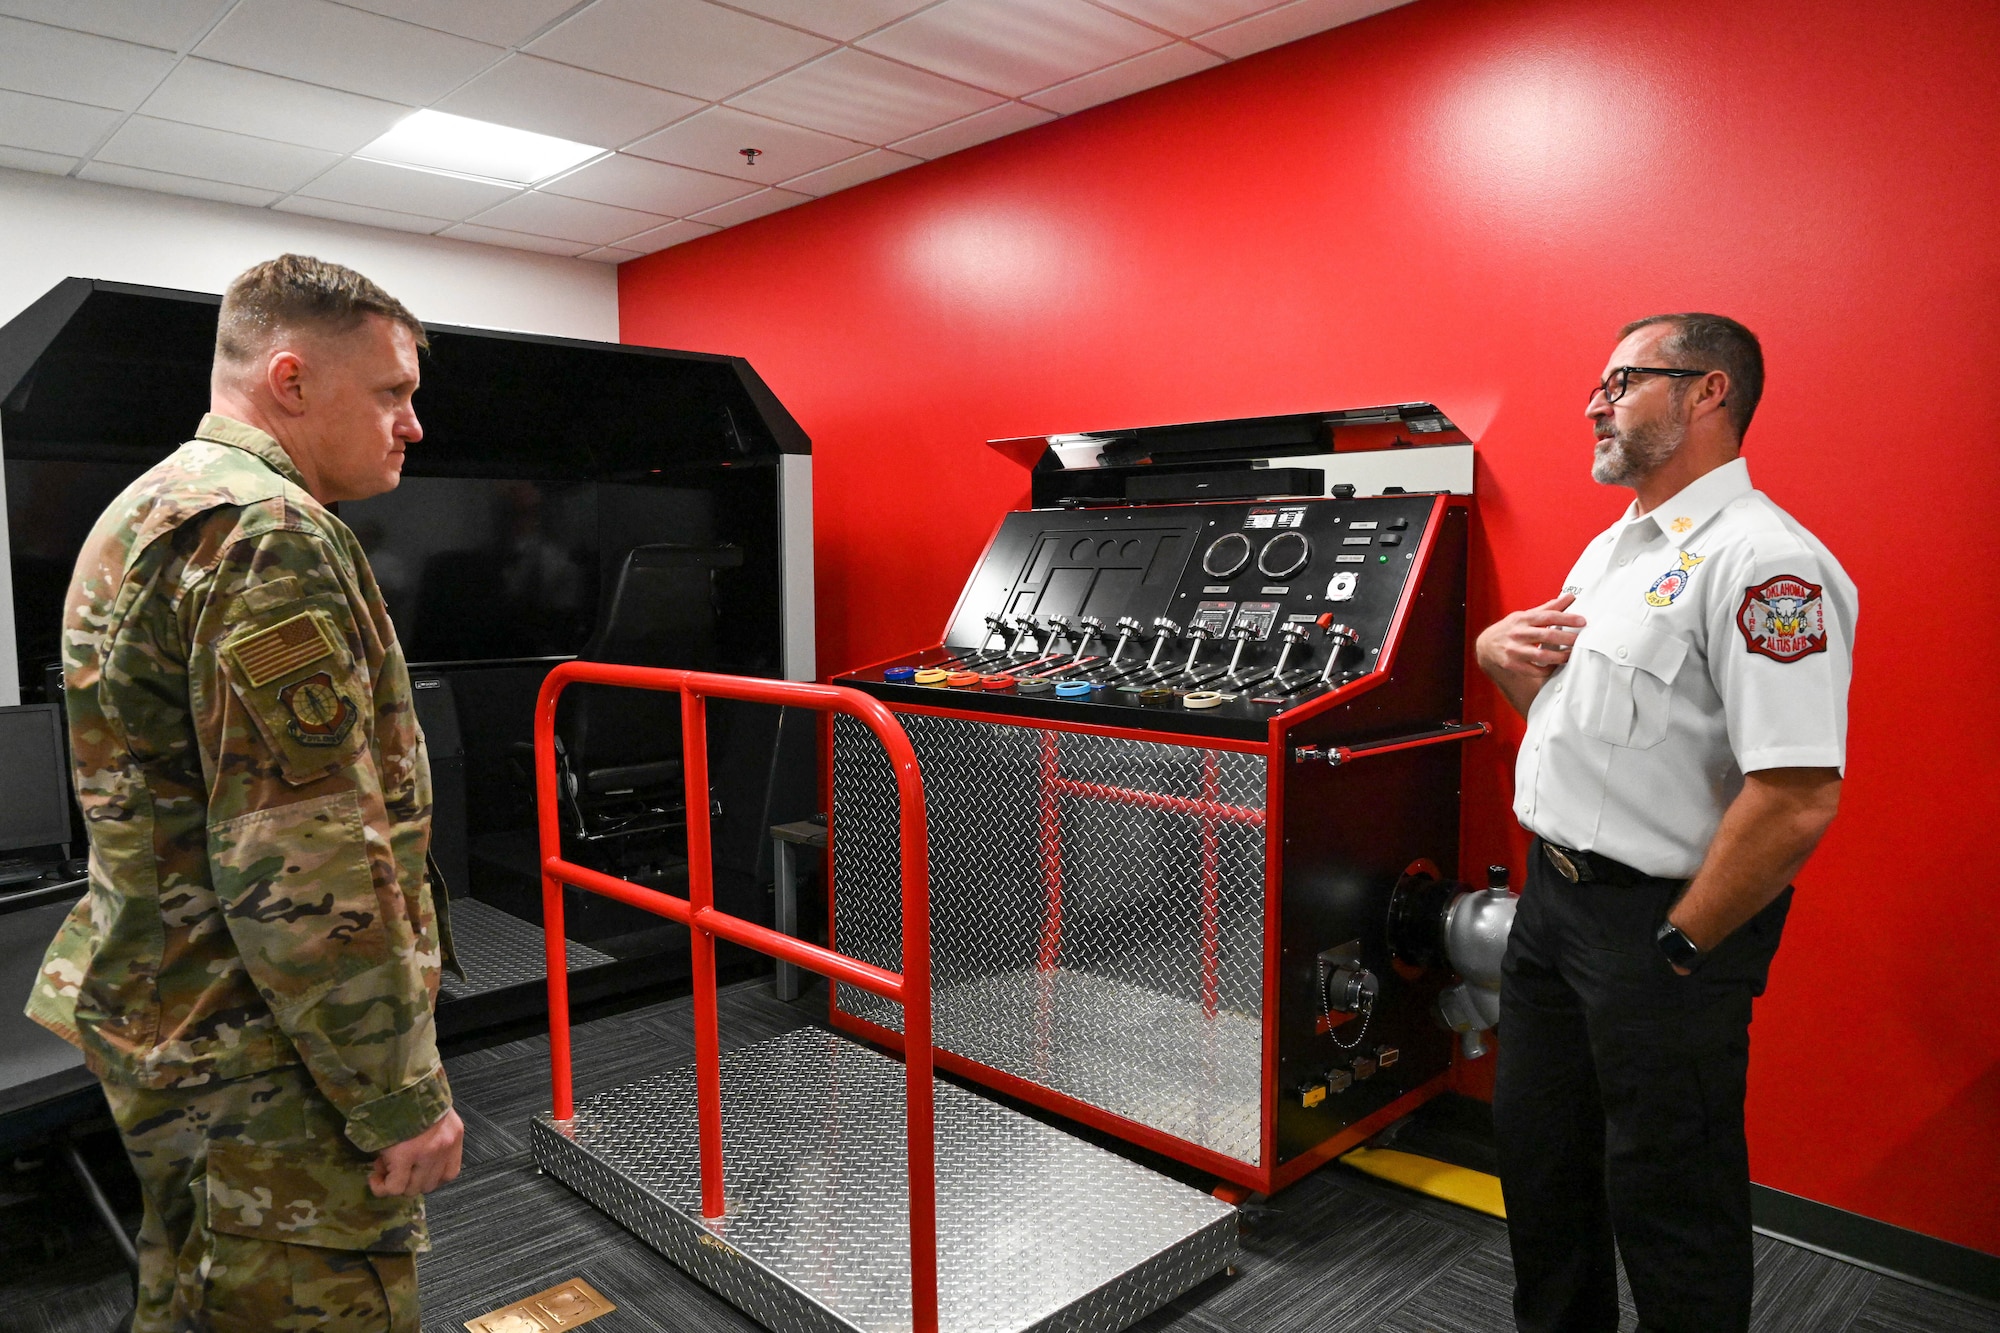 Phillip Fourreaux, 97th Civil Engineer Squadron fire chief, presents firefighter training apparatuses to U.S. Air Force Brig. Gen. William Kale, Air Force Civil Engineer Center commander, during a tour at Altus AIr Force Base, Oklahoma, Dec. 12, 2023. The devices allow for firefighters to train for real-life scenarios without overuse of actual equipment. (U.S. Air Force photo by Senior Airman Miyah Gray)